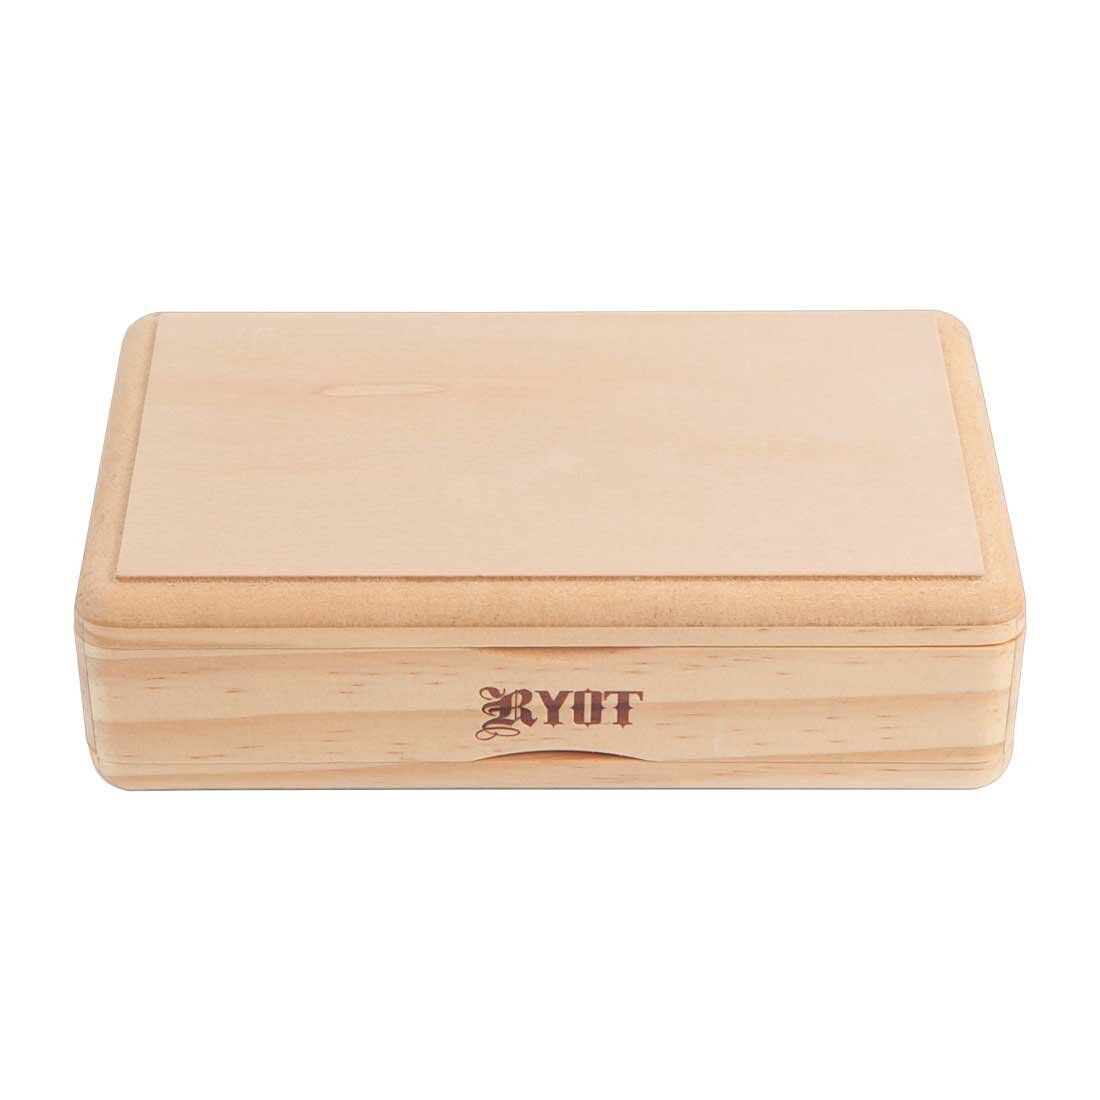 4x7” Solid Top Box in Natural | Premium Wooden Box Perfect for Sifter - Monof...